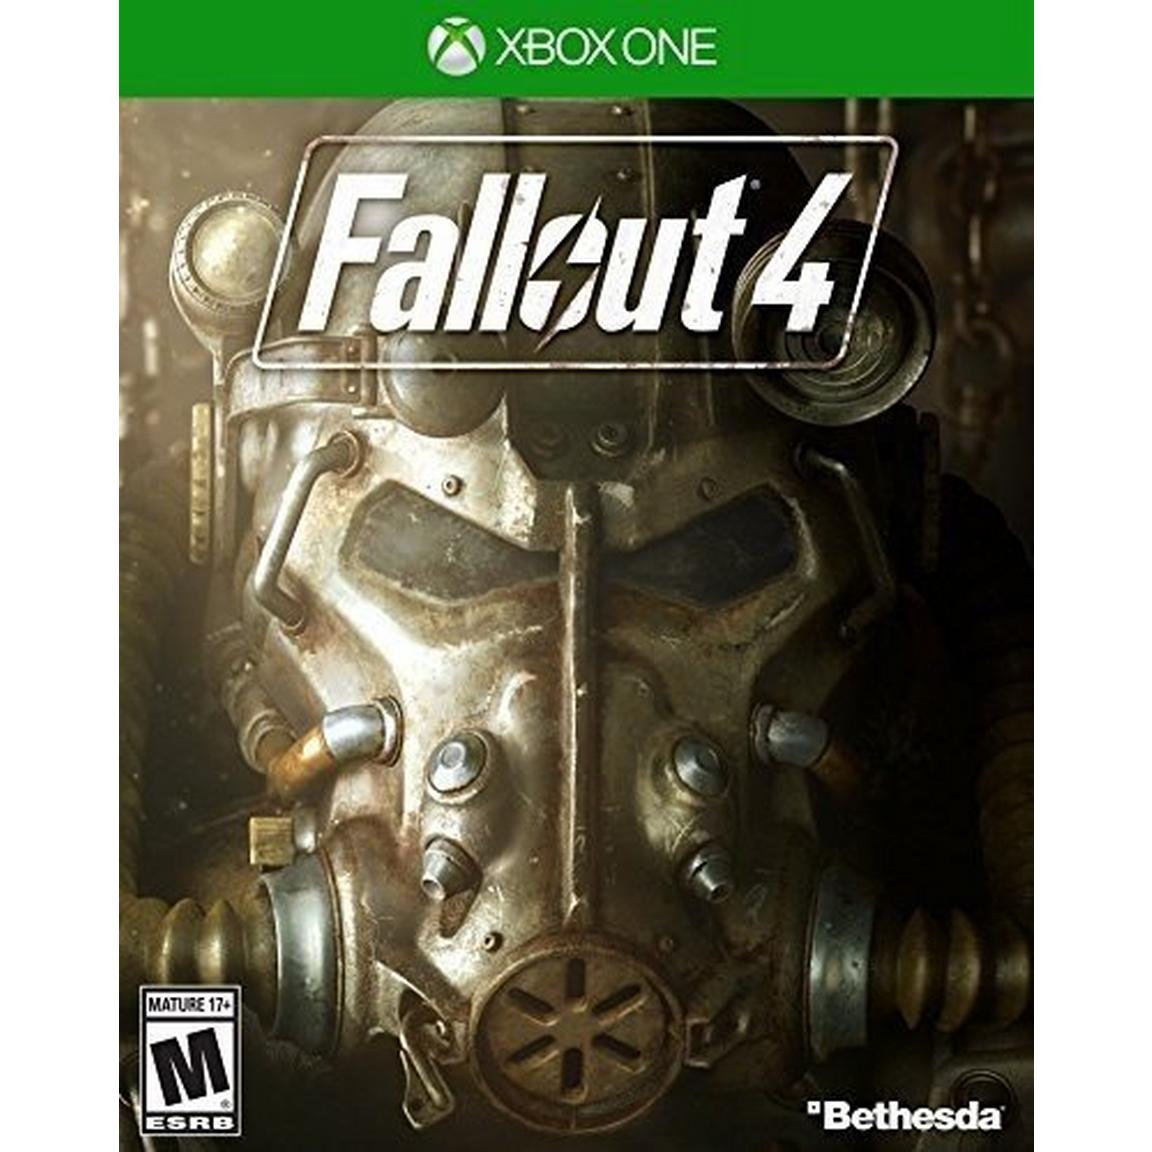 Fallout 4 Game of the Year Steelbook Edition - Xbox One -  Bethesda Softworks, FA4GGMX1PENA